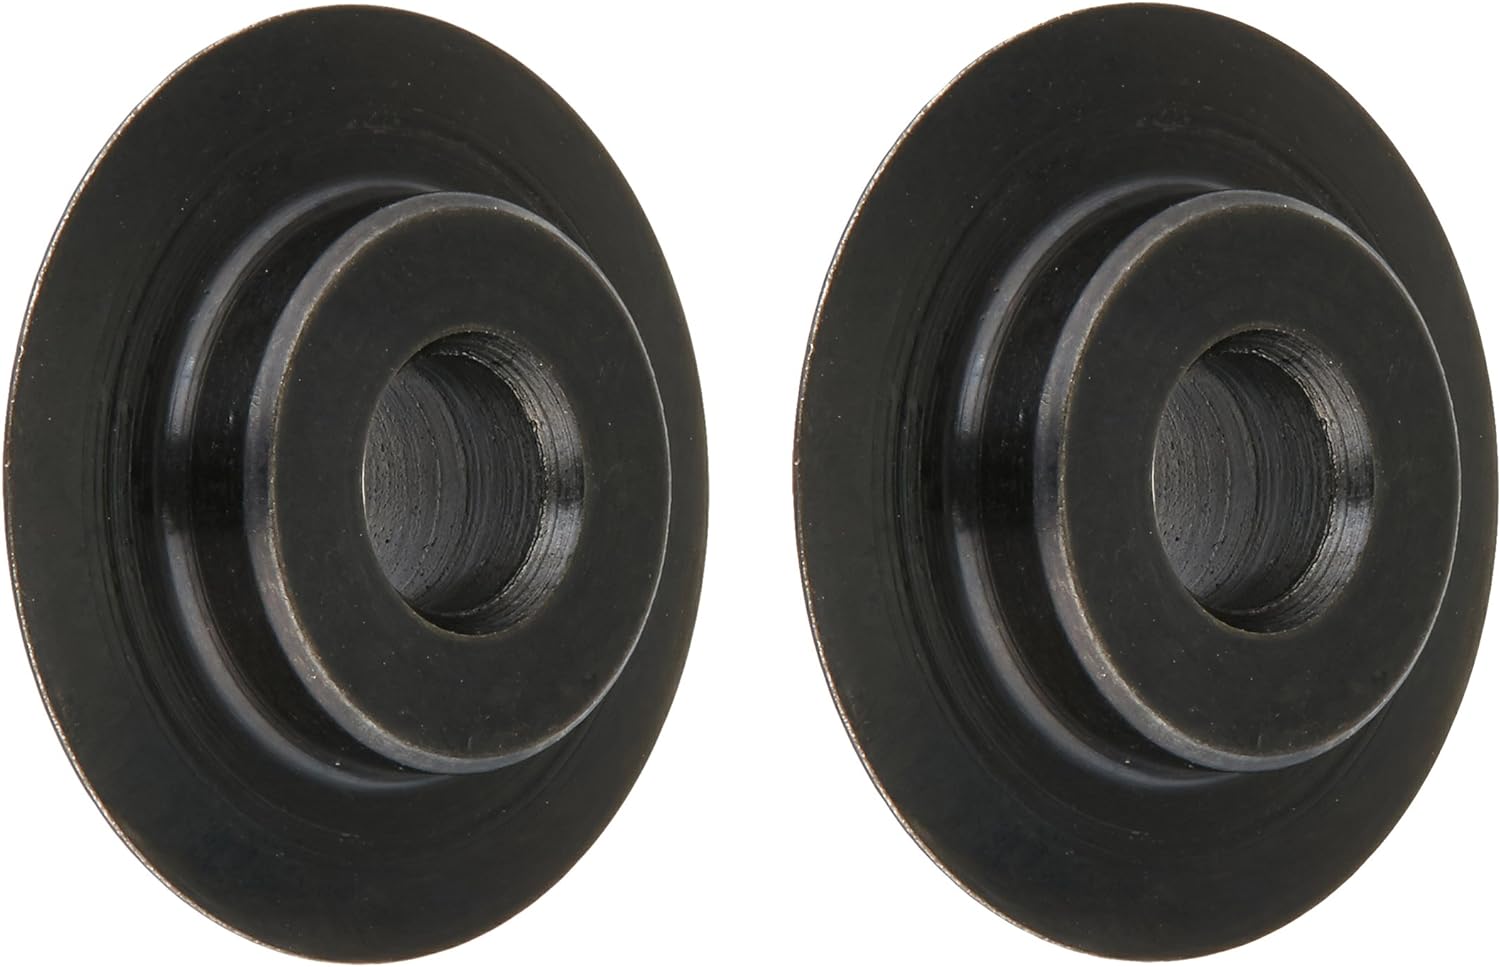 Superior Tool 42835 Replacement Cutter Wheels for 35180 (Cu, Al, Brass), One Size, Multi